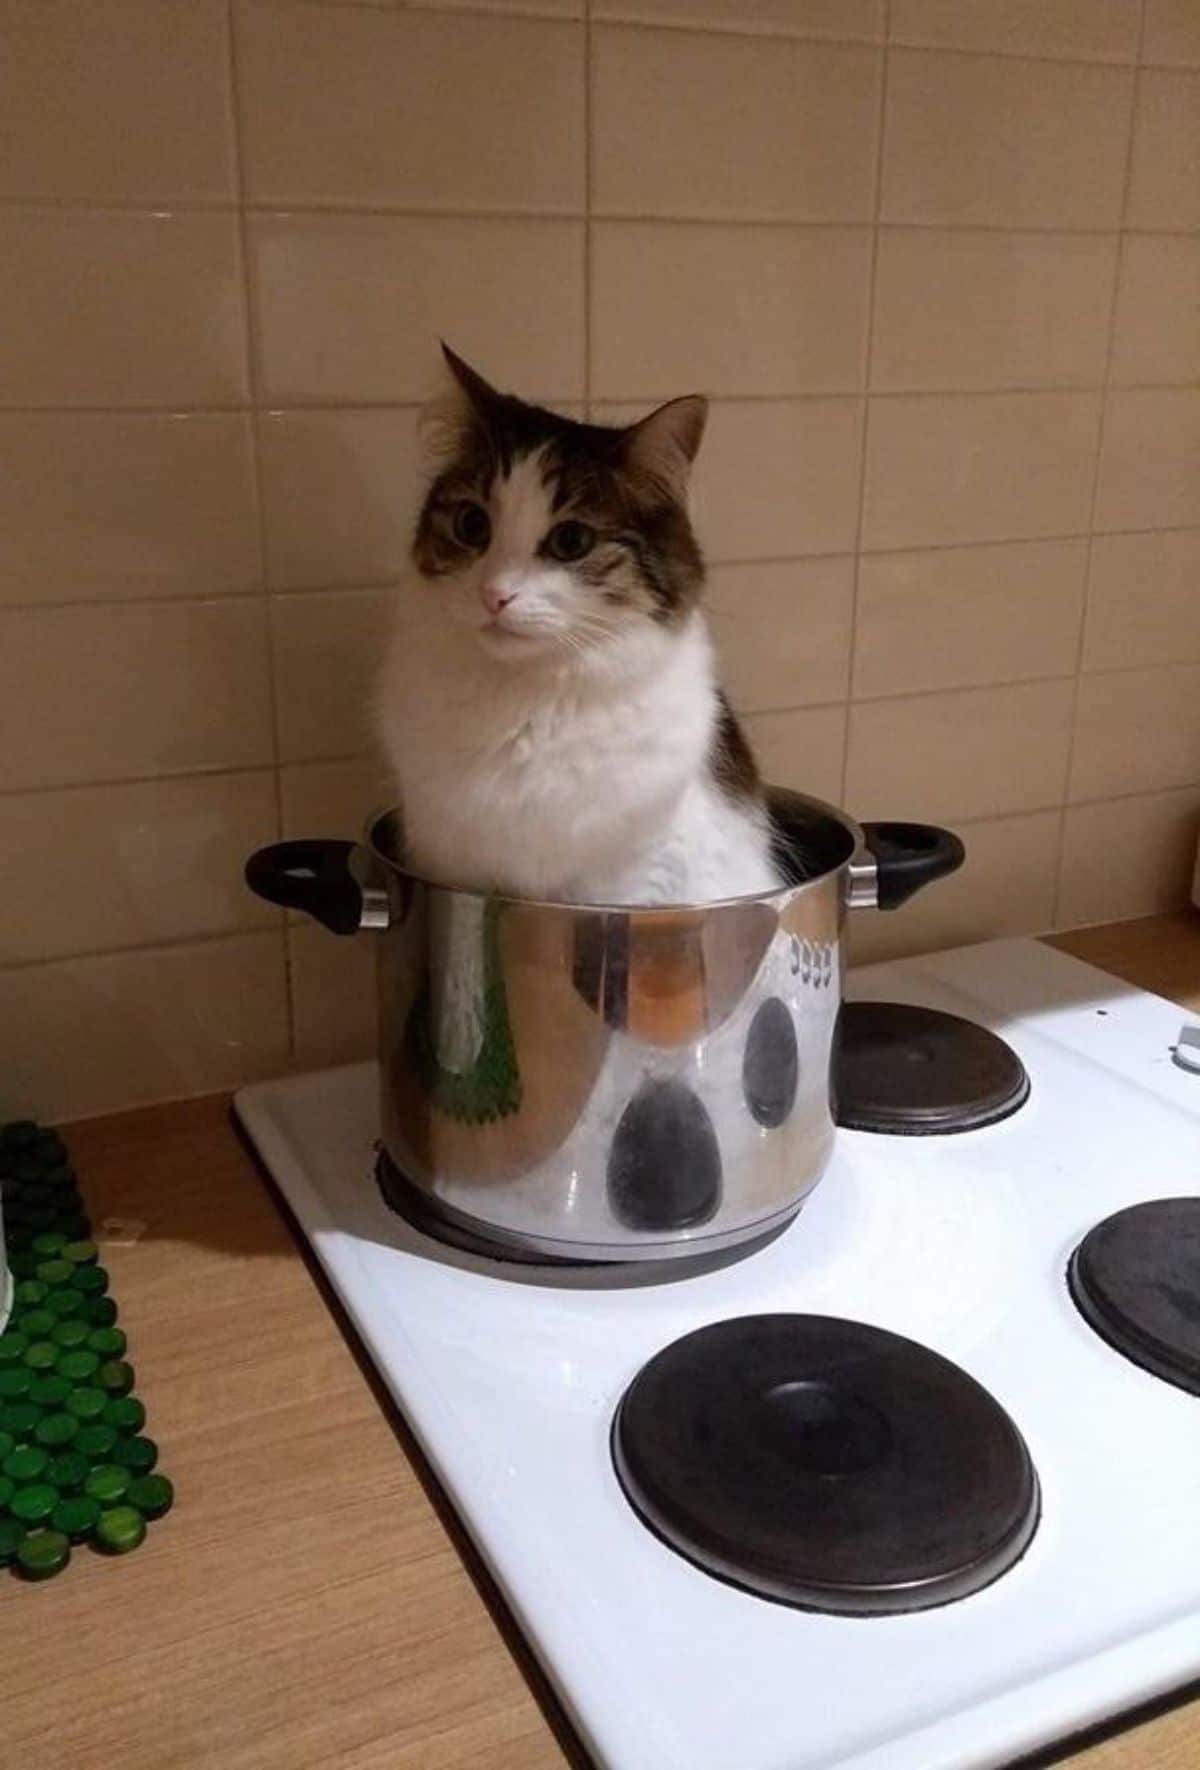 brown and white tabby cat sitting in a silver pot on a white stove